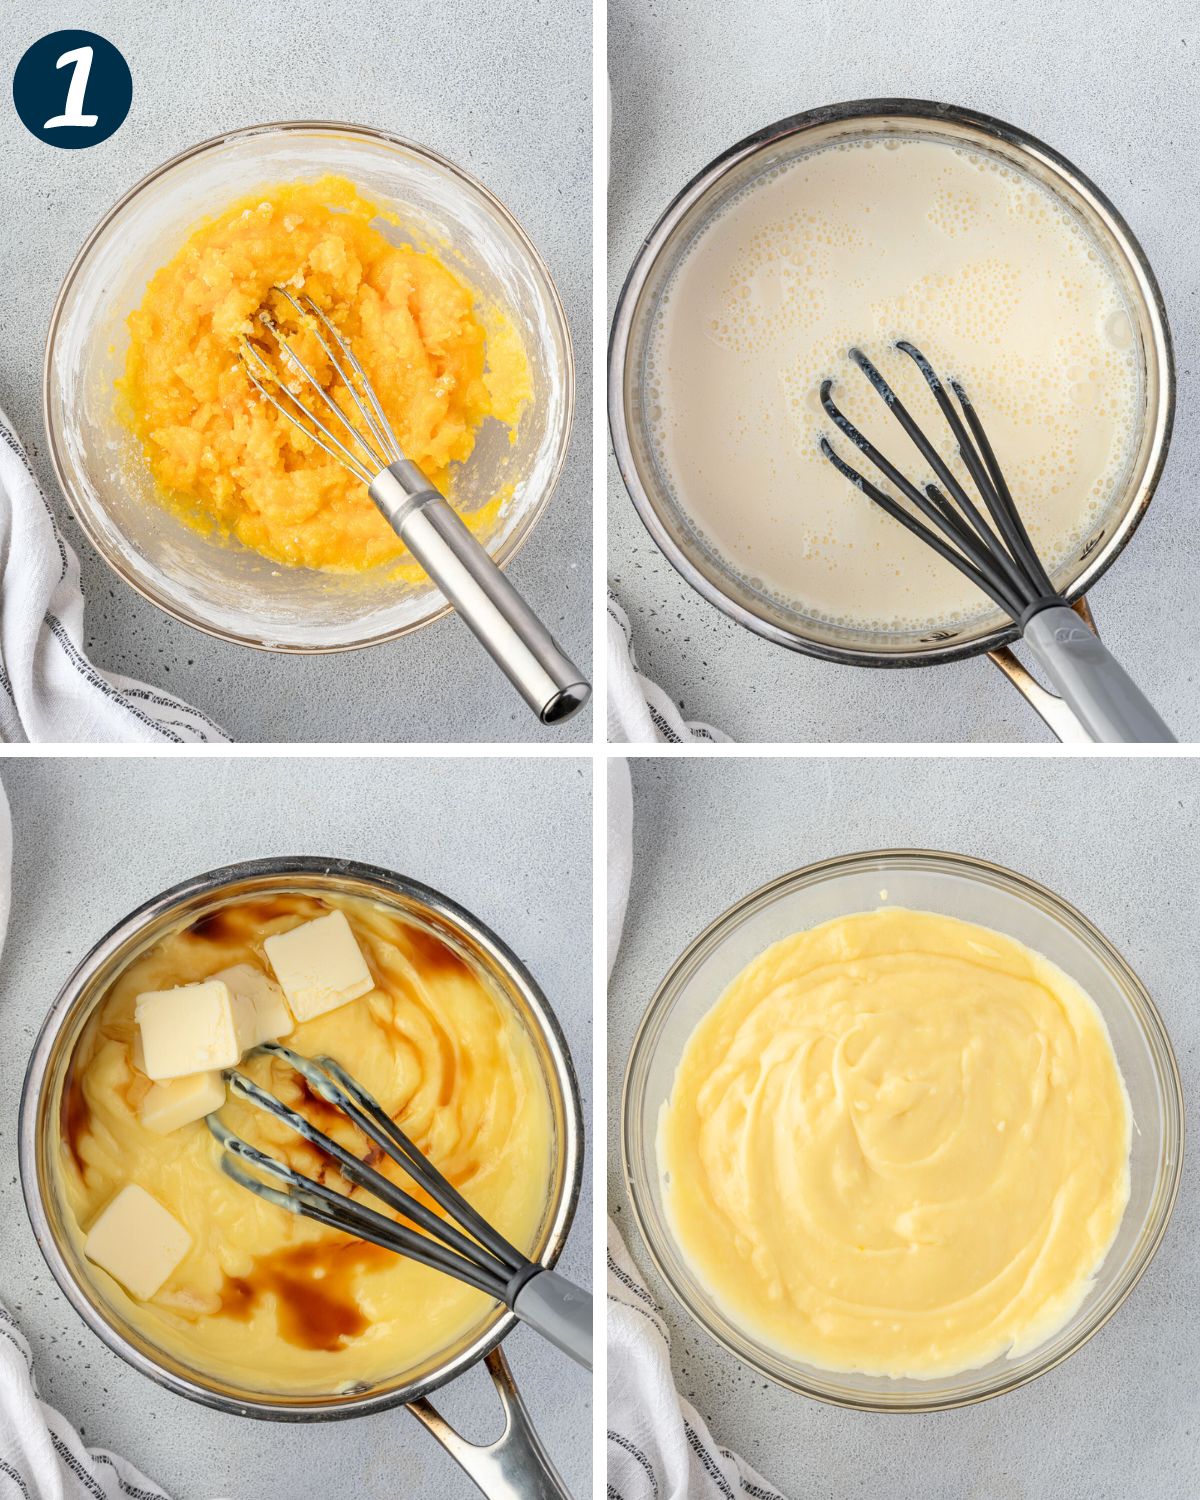 4 images showing eggs and cornstarch mixed together, heavy cream added in pan, custard with butter and vanilla on top, and pastry cream in a bowl.